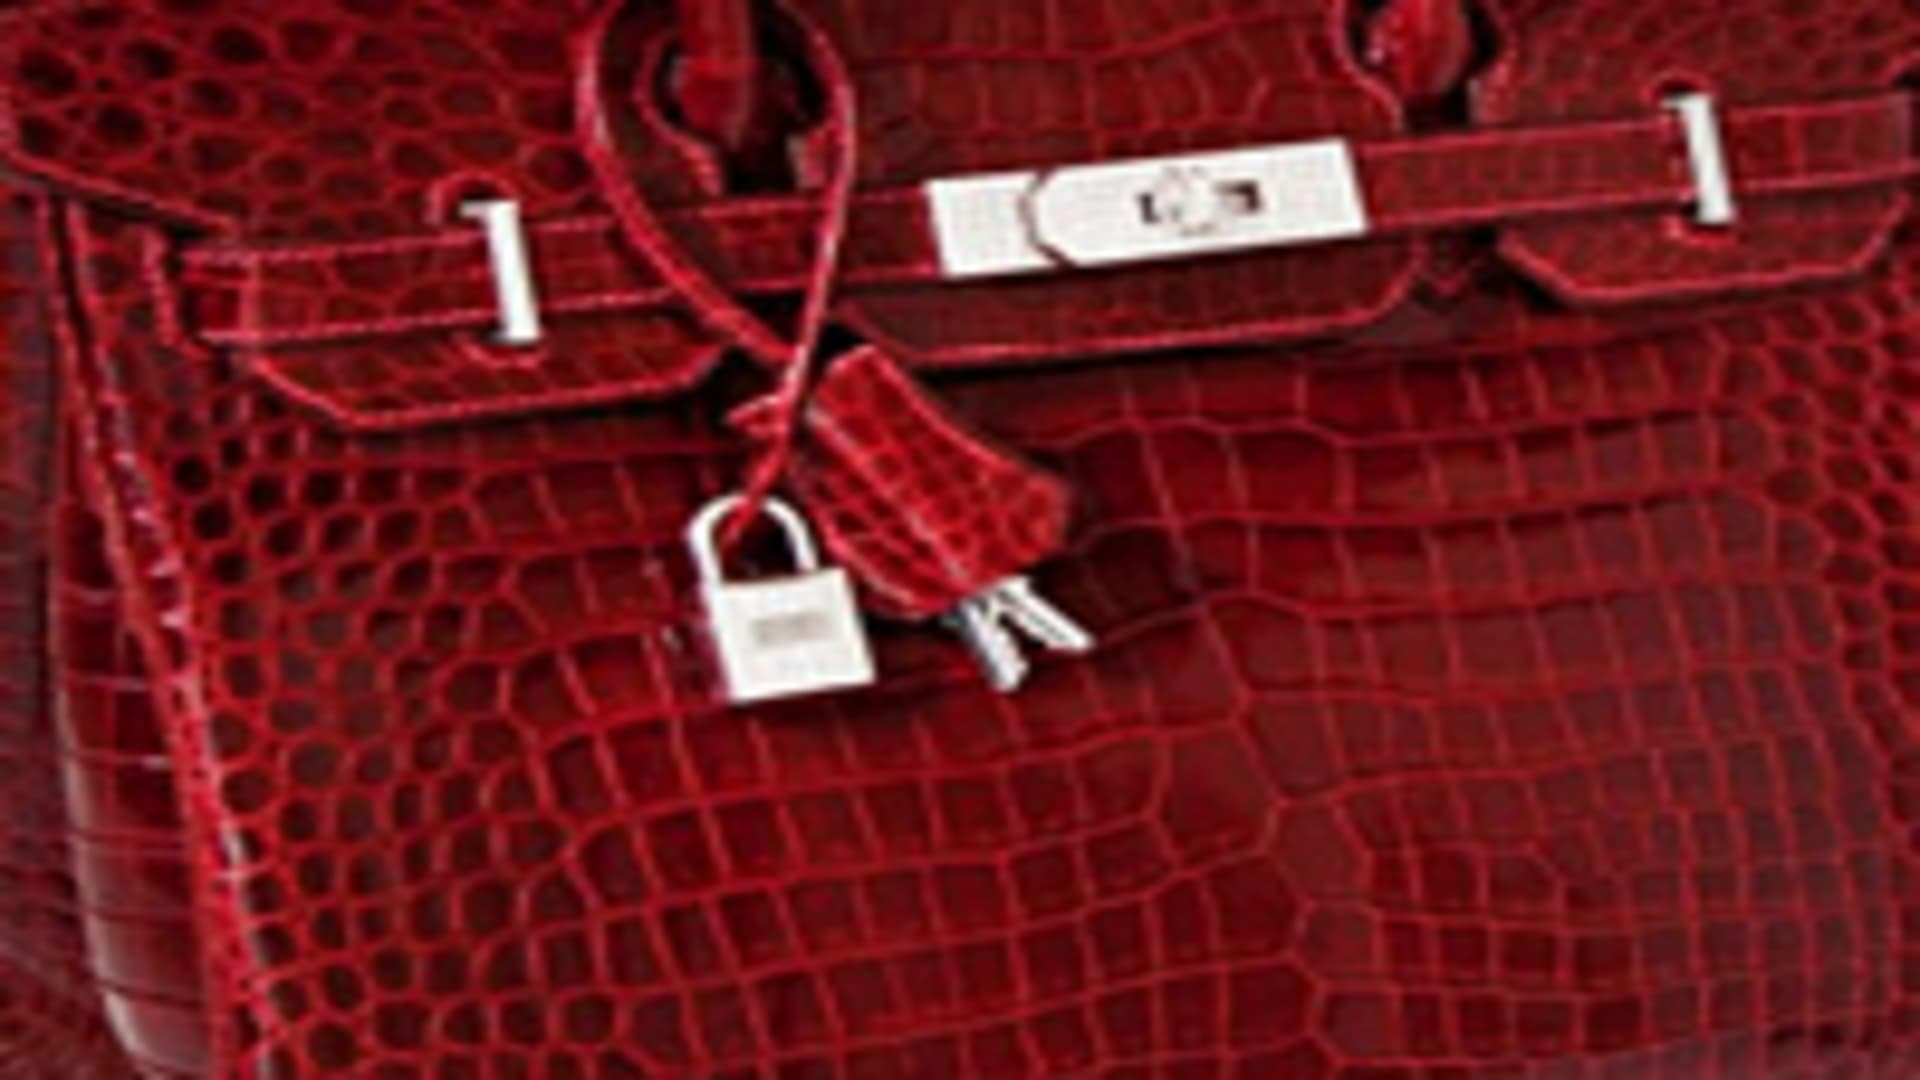 $203,150 purse: Hermes bag sells for what?! 